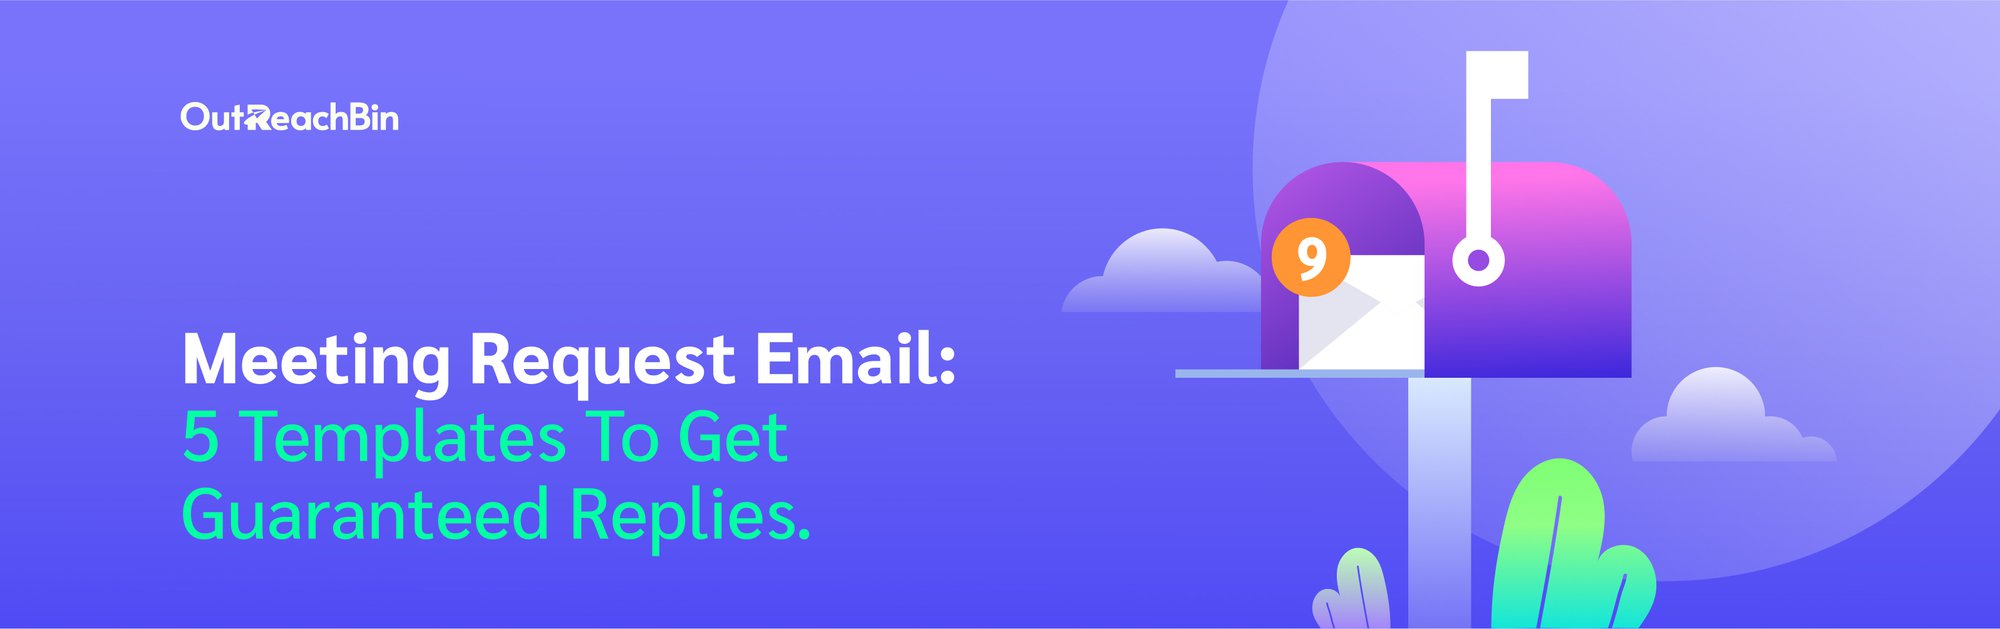 Meeting Request Email: 5 Templates To Get Guaranteed Replies